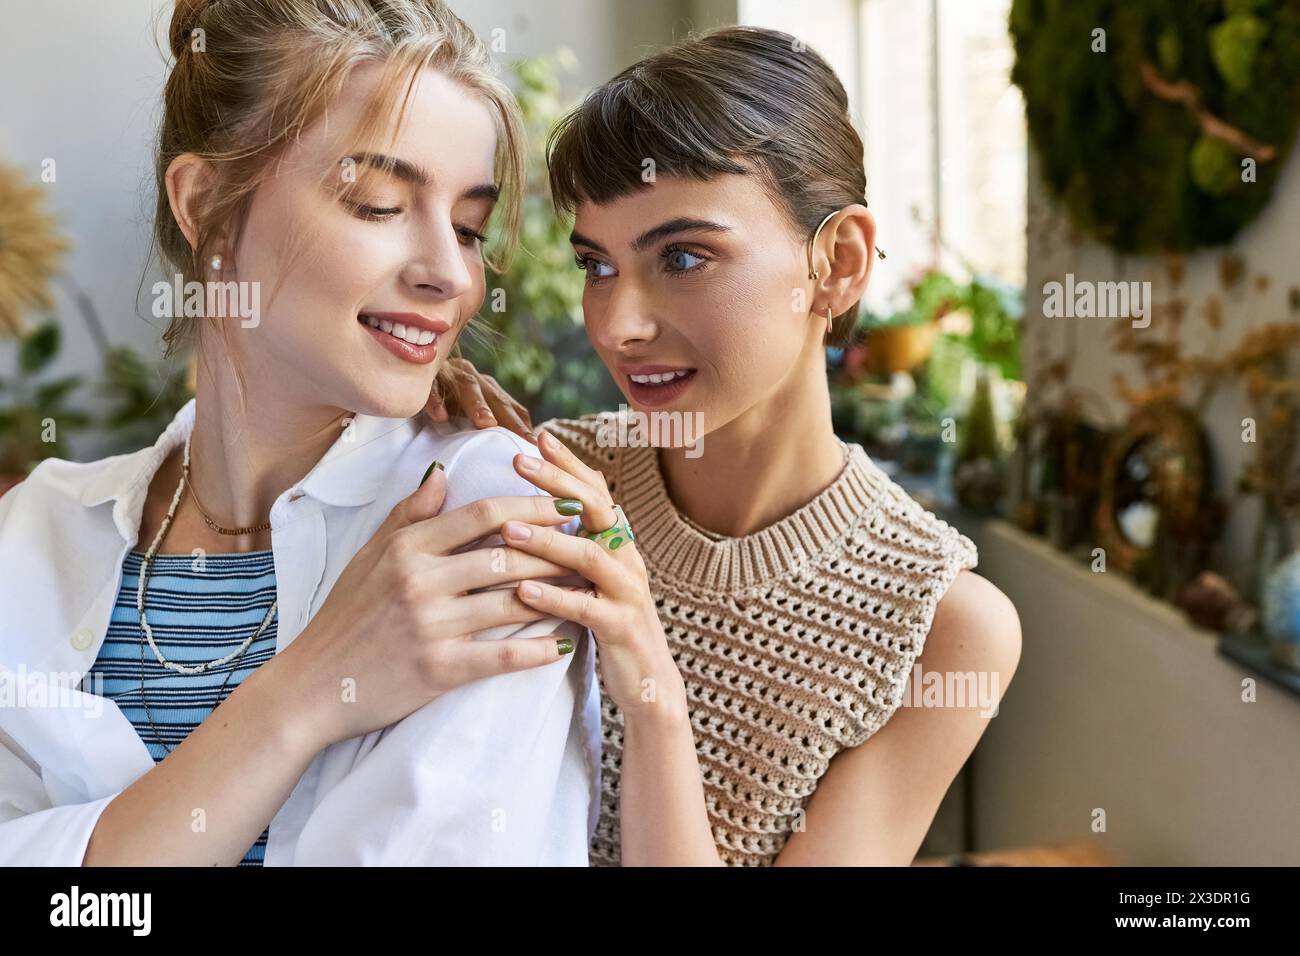 Two young women, one with short hair and the other with long hair, stand side by side in an art studio, sharing a tender moment. Stock Photo